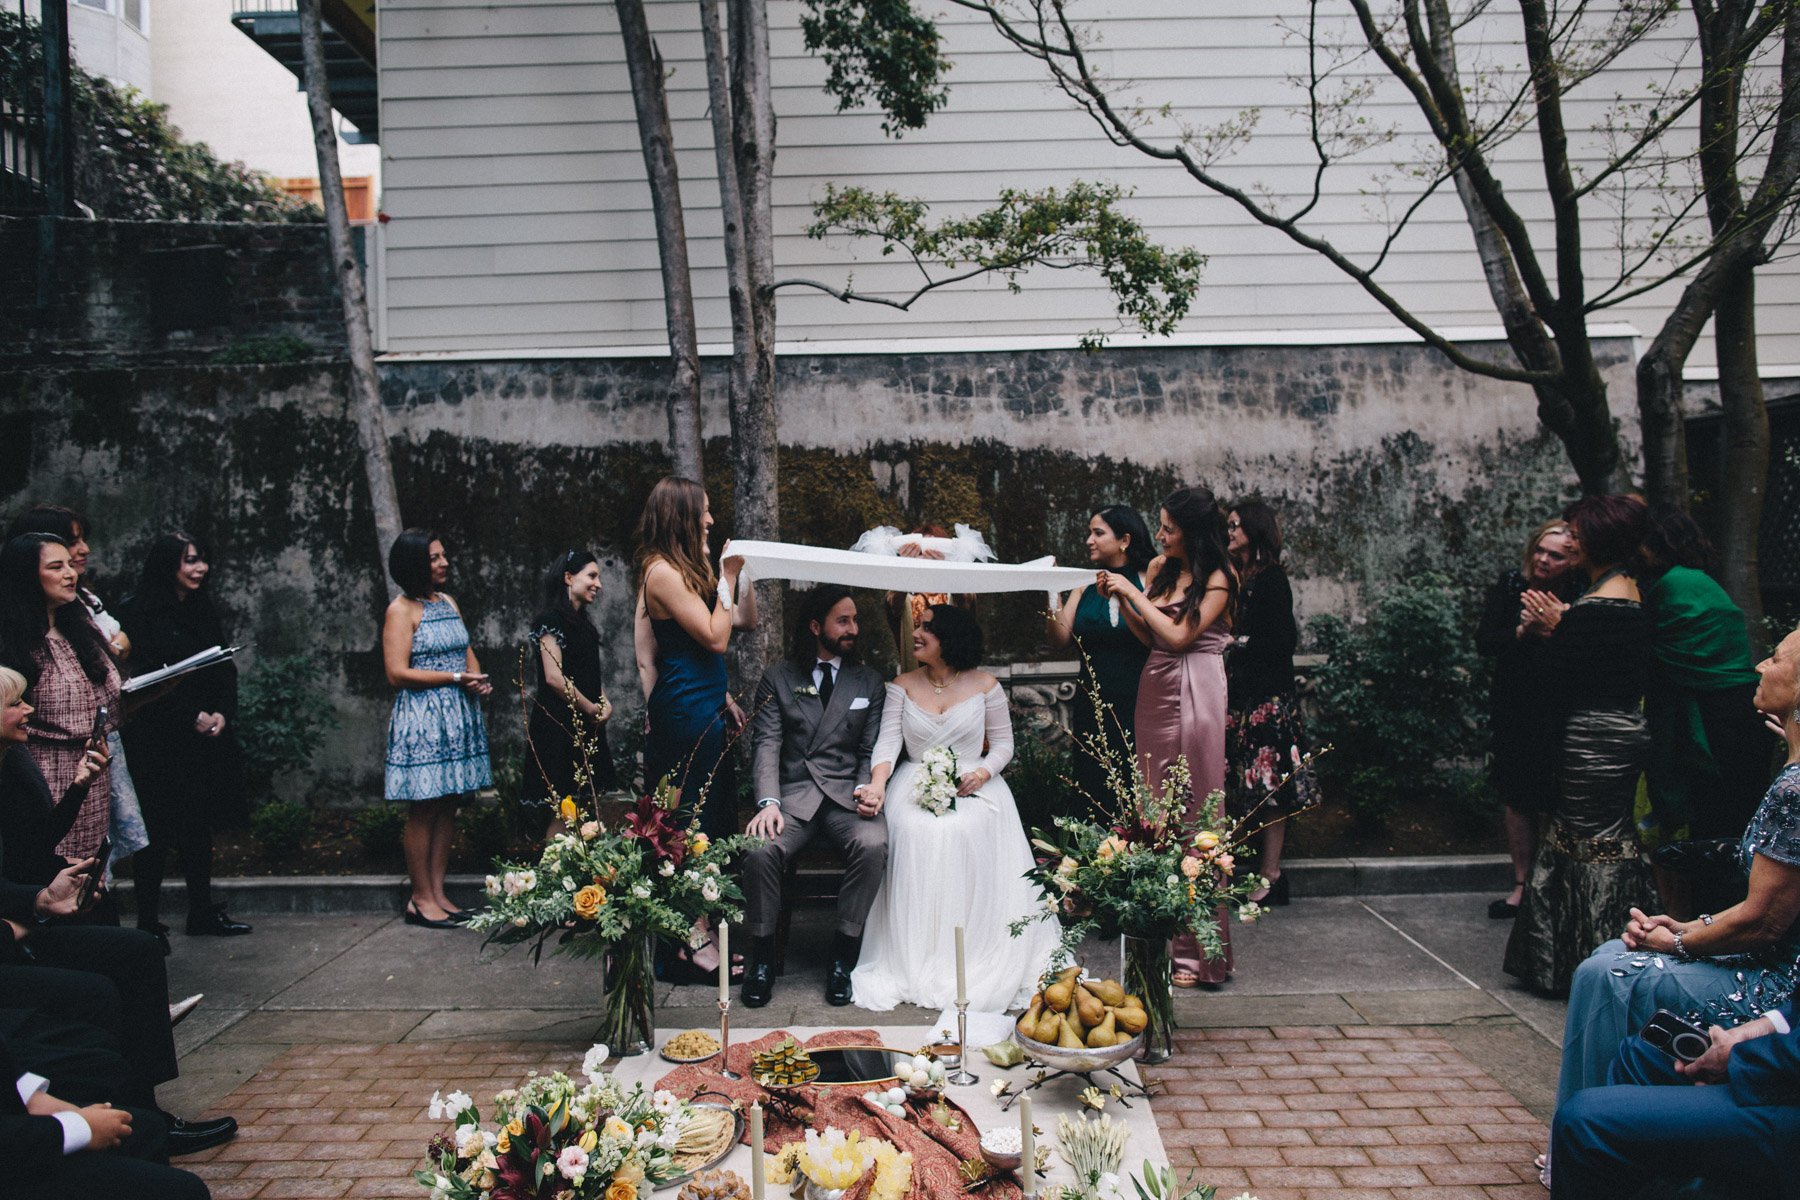 Persian wedding ritual at Haas-Lilienthal House